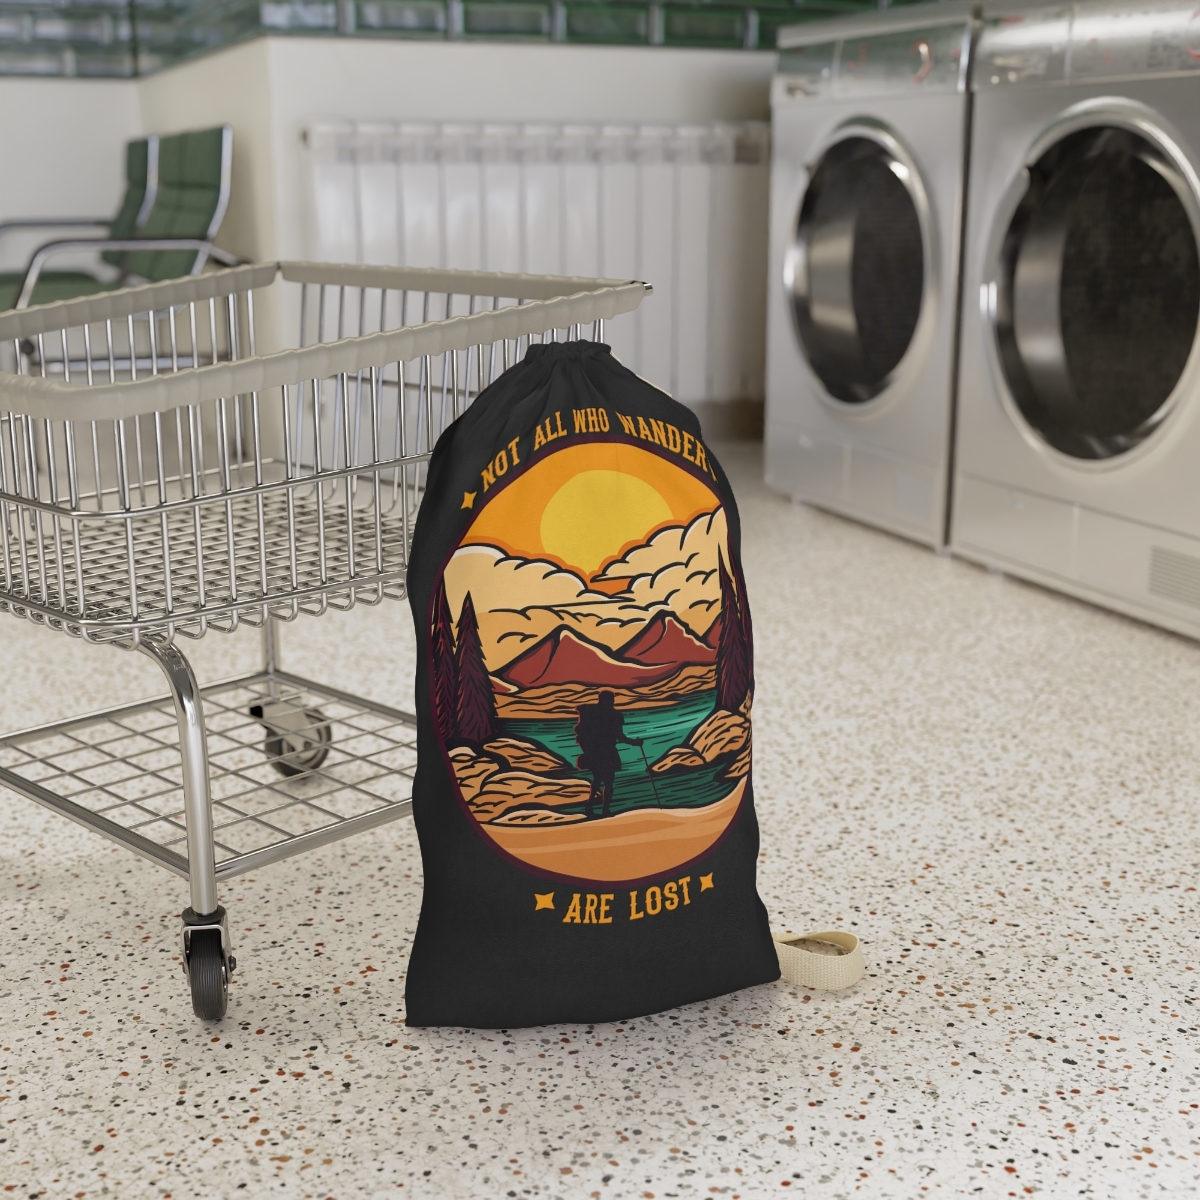 Customizable Laundry Bag with "Not All Who Wander Are Lost" Design for Wanderlus - $31.93 - $42.23